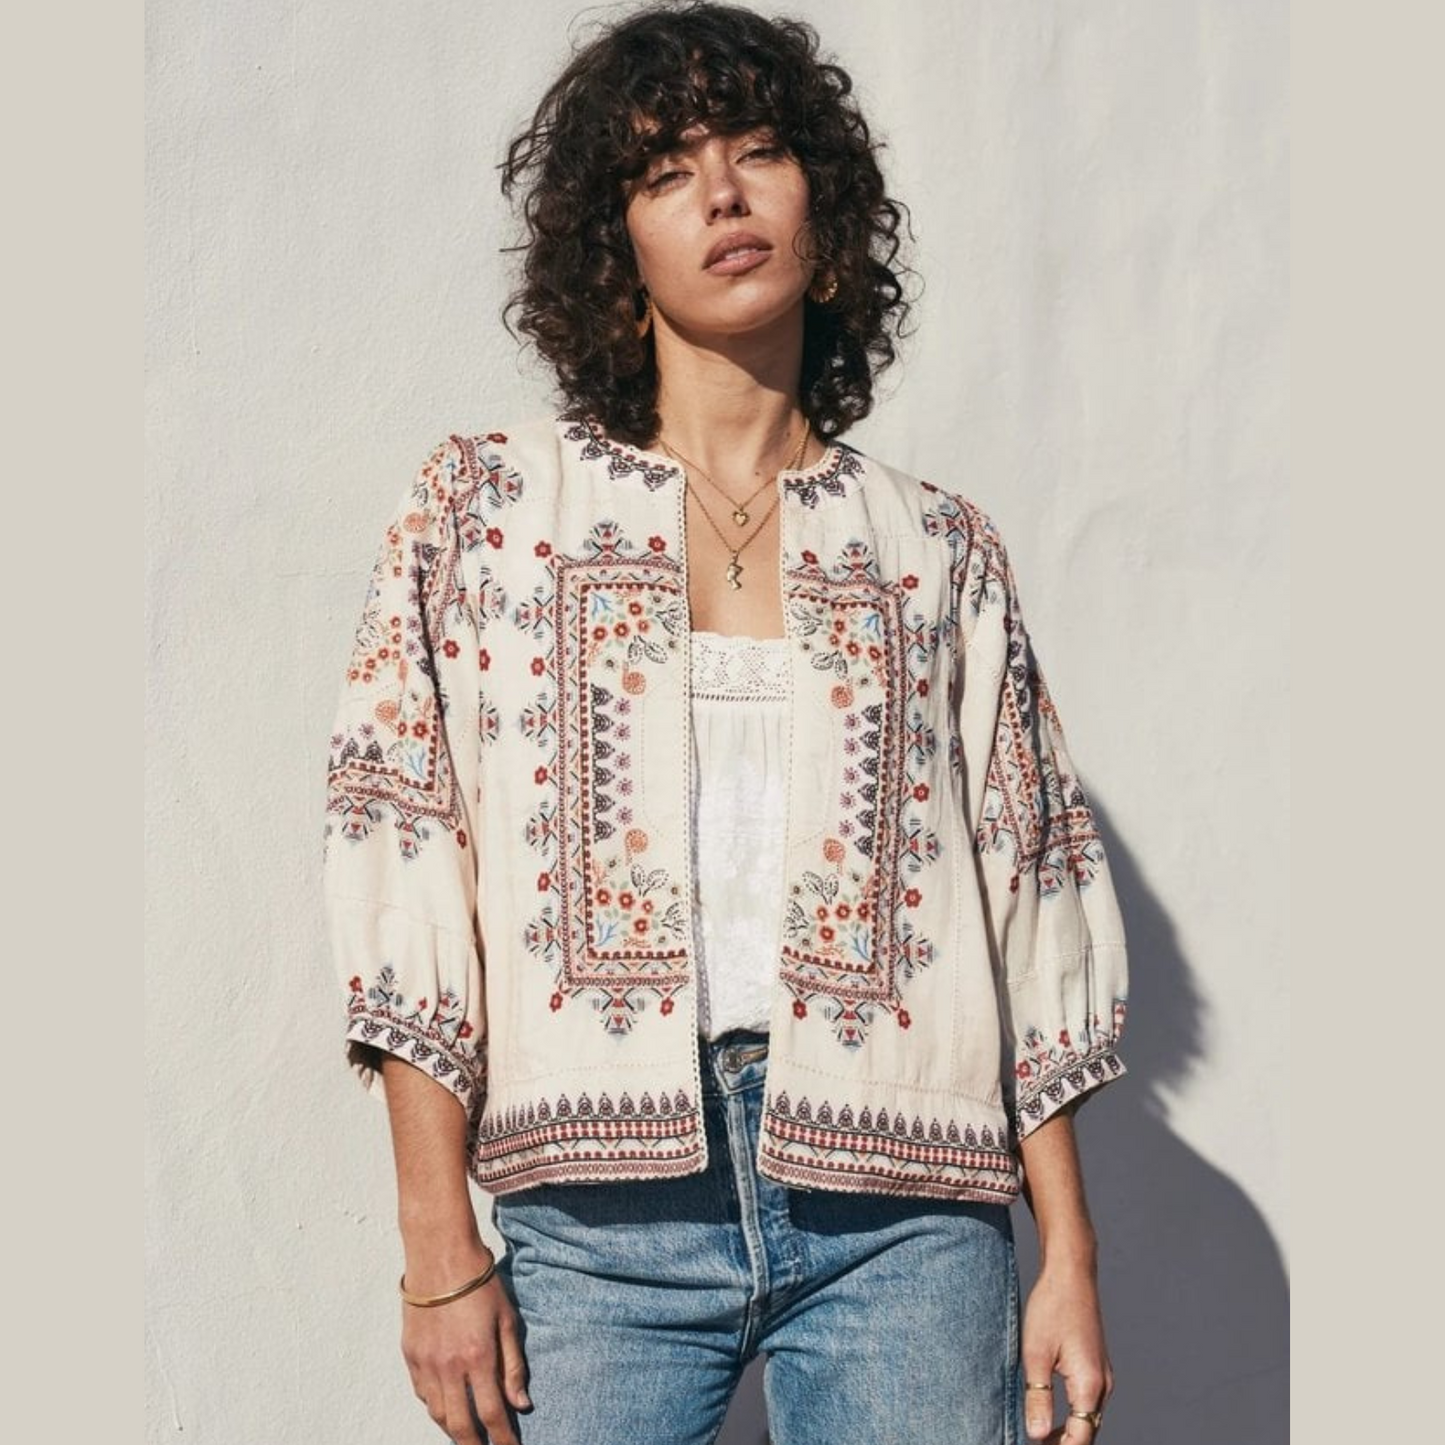 Woman wearing the Eden Embroidered Print Jacket by M.A.B.E.